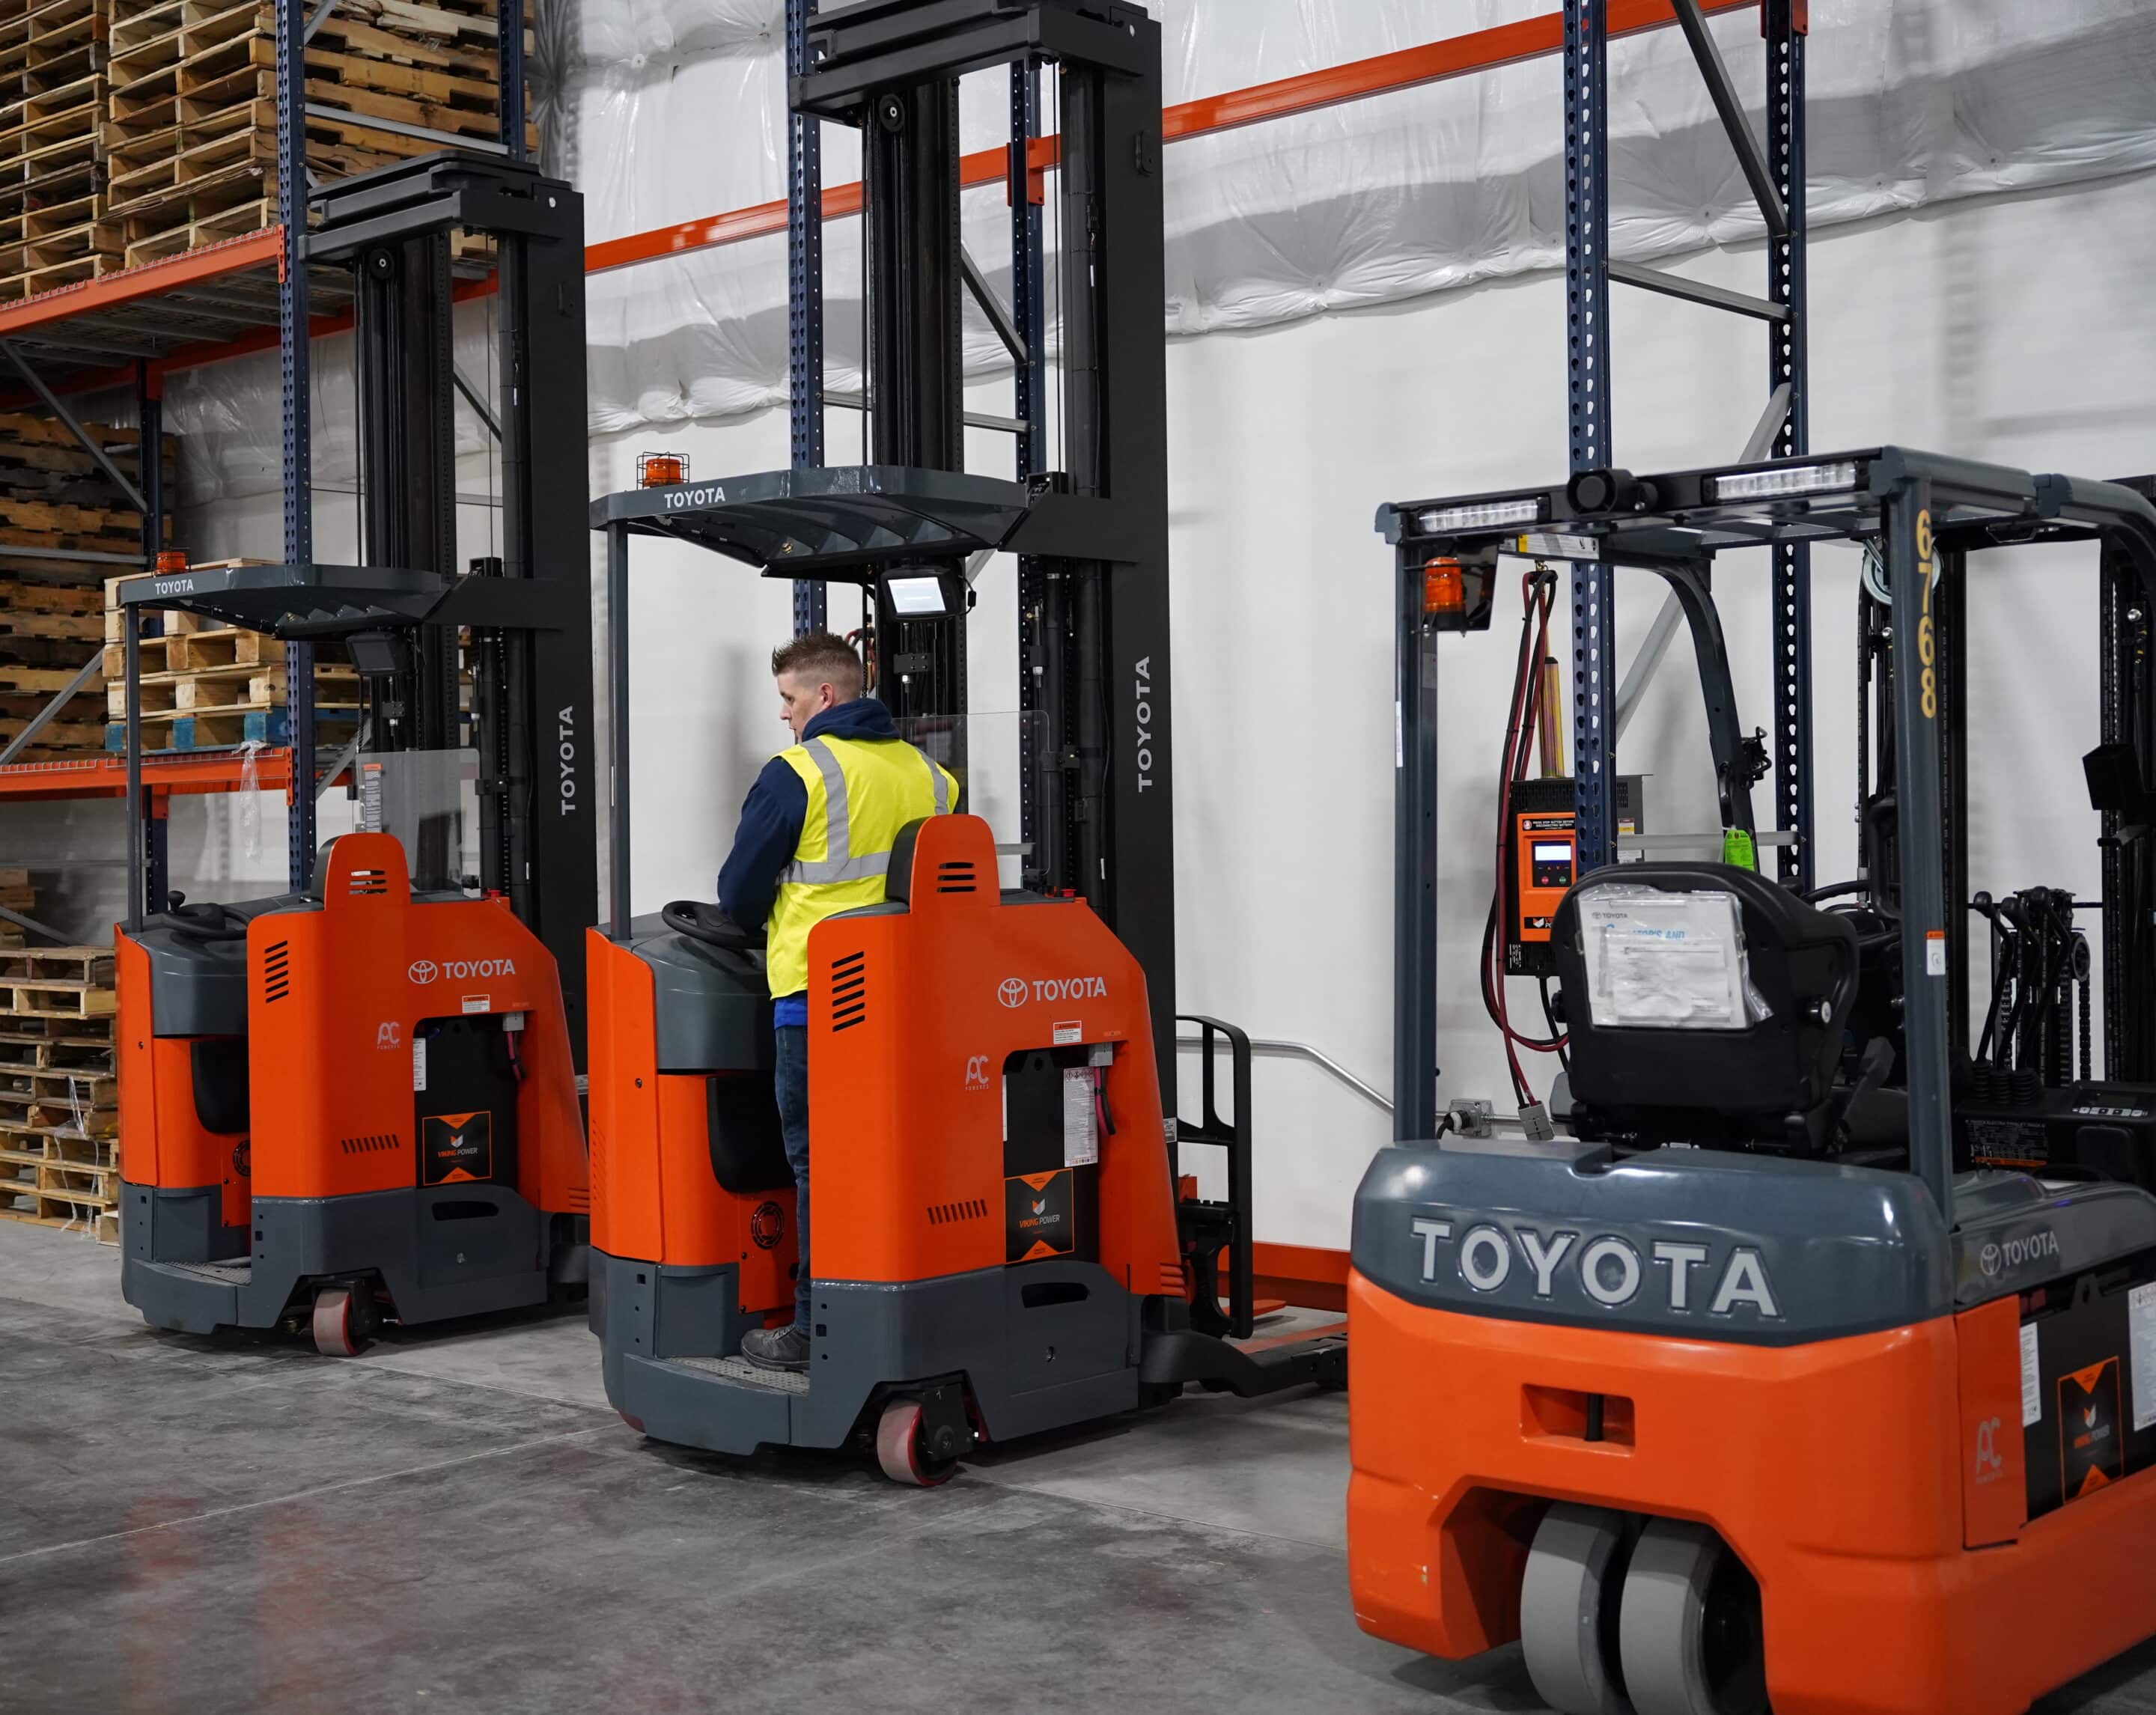 Man on forklift in warehouse.